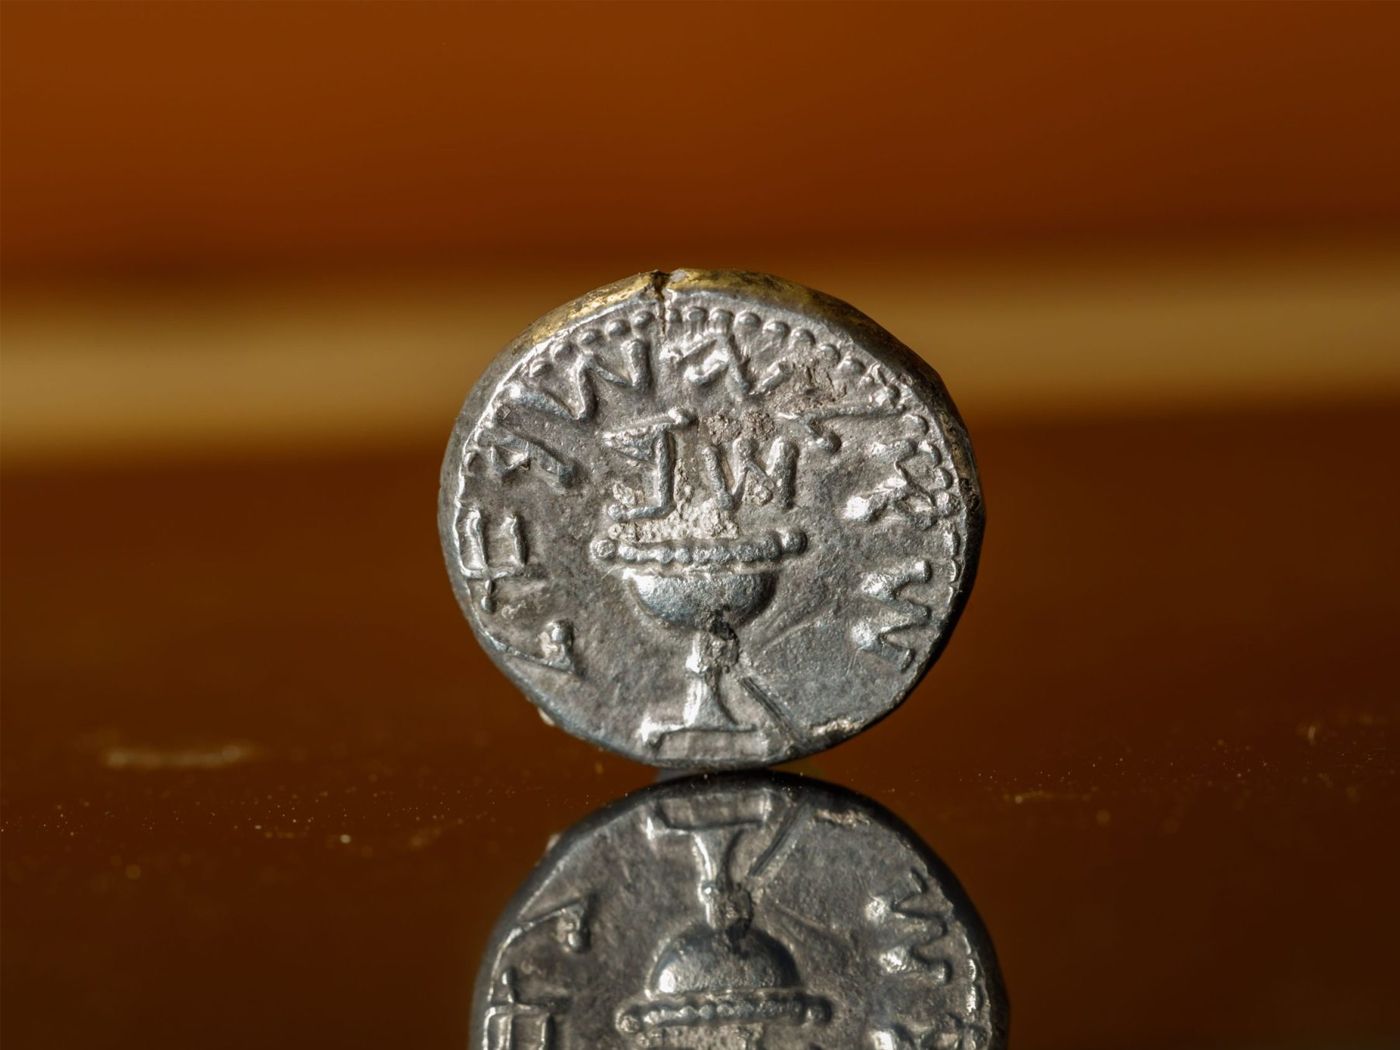 Israeli Preteen Discovers Rare Silver Coin Minted During Jewish Revolt Against Rome | Smart News| Smithsonian Magazine